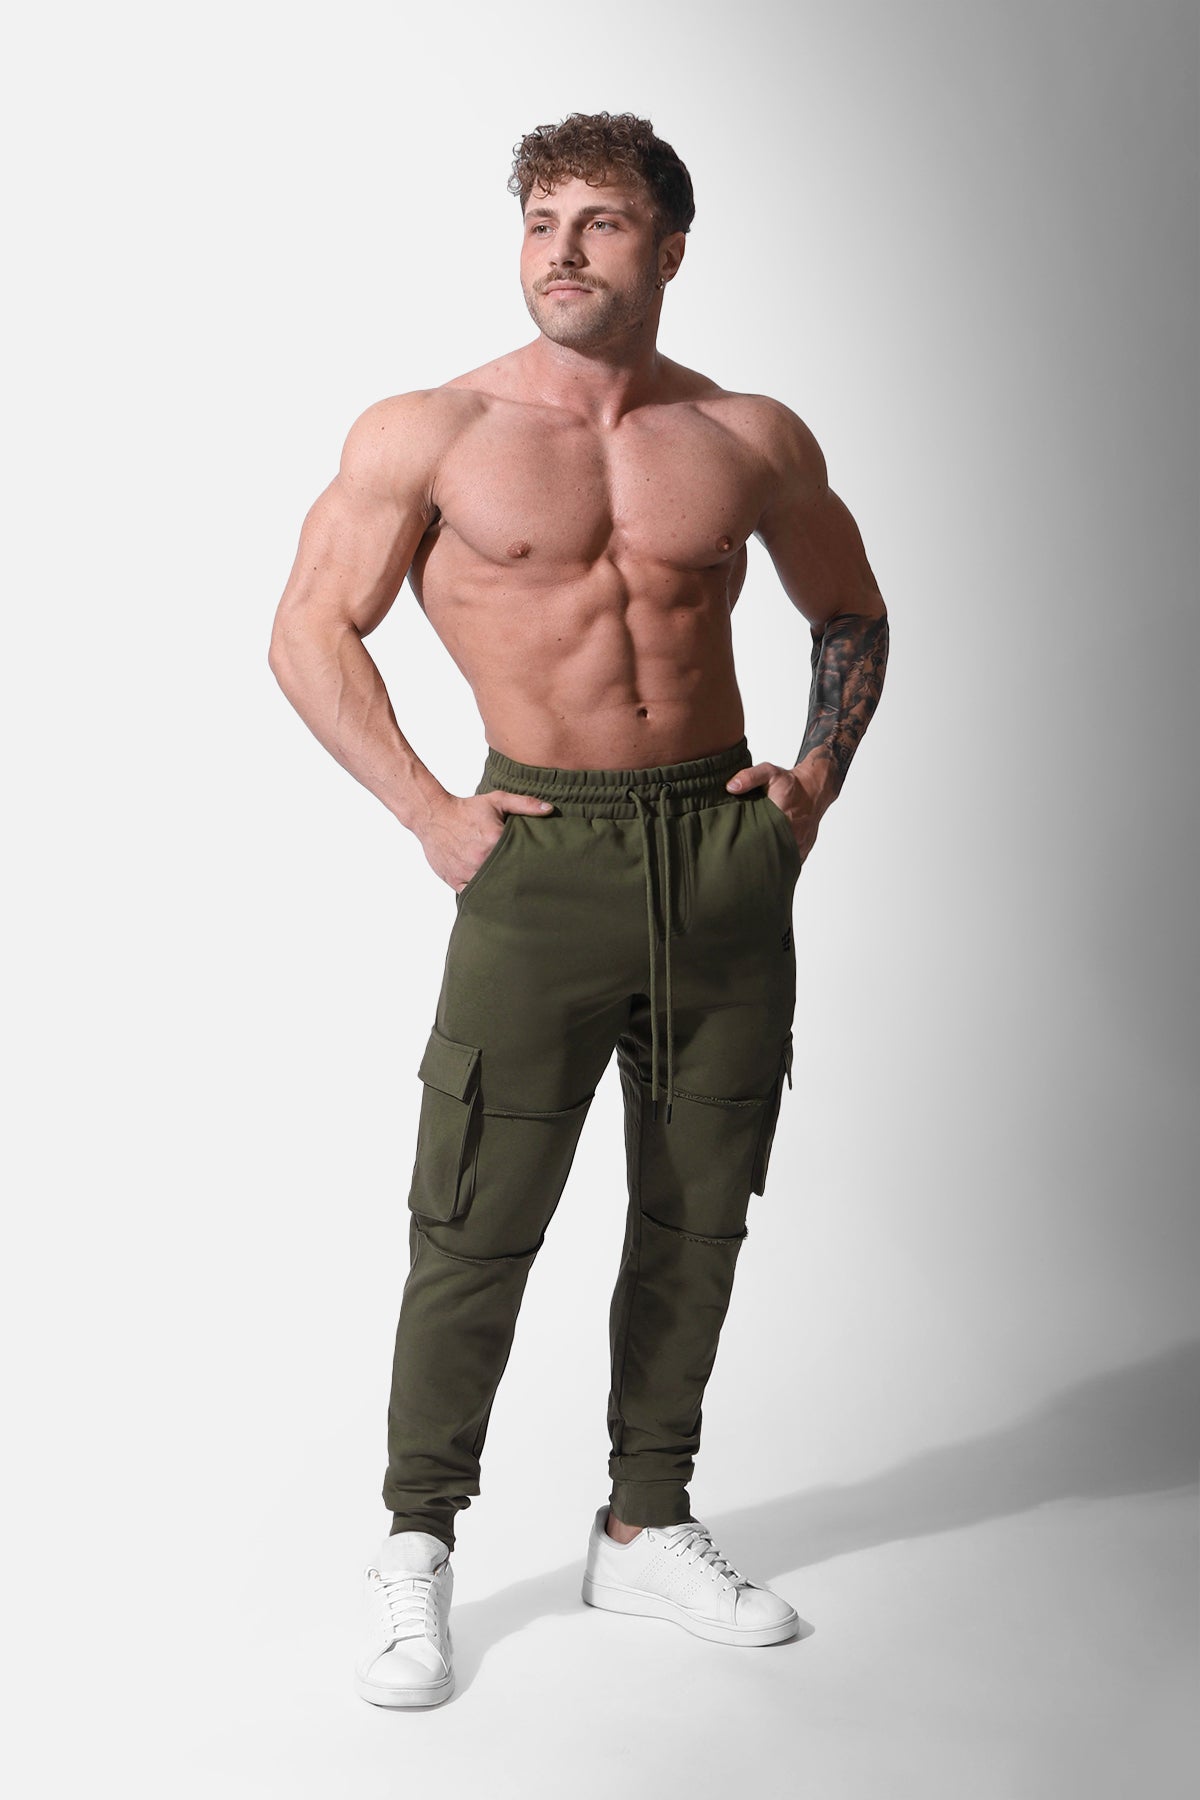 Renegade Cargo Joggers - Olive